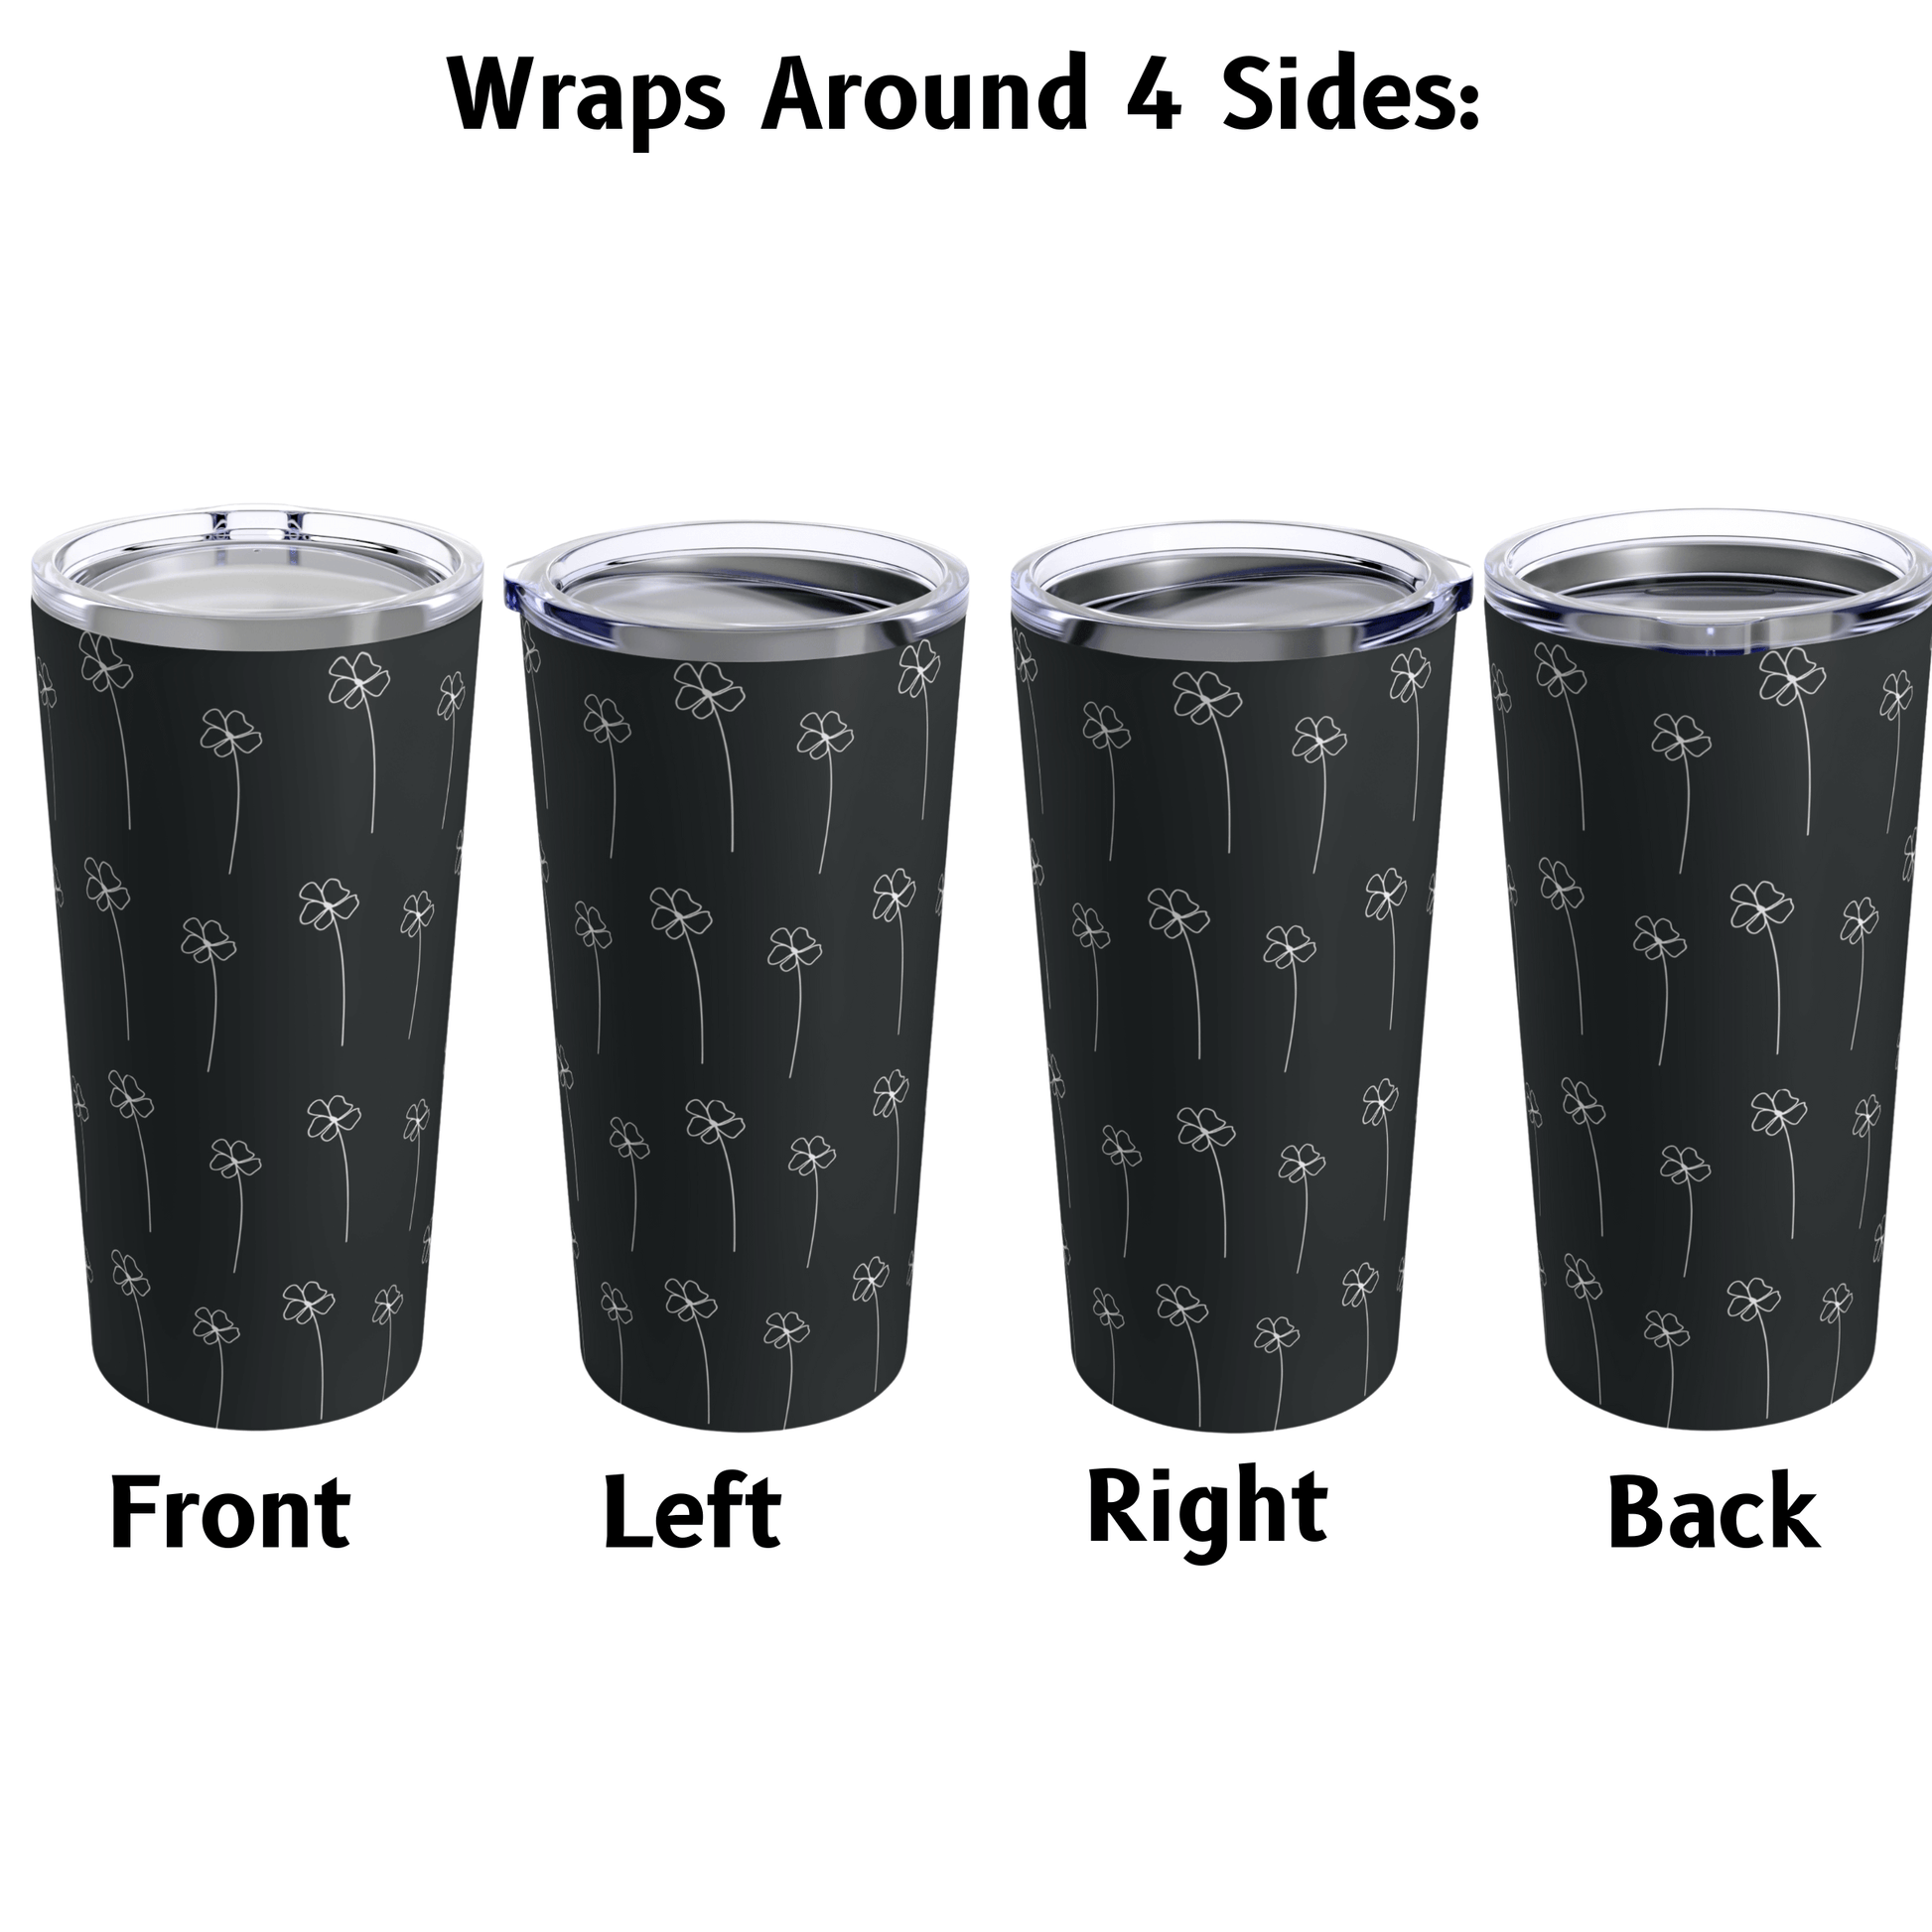 All four sides of the travel cup show the pattern on all four sides. This coffee cup is insulated to keep liquids hot and cold.